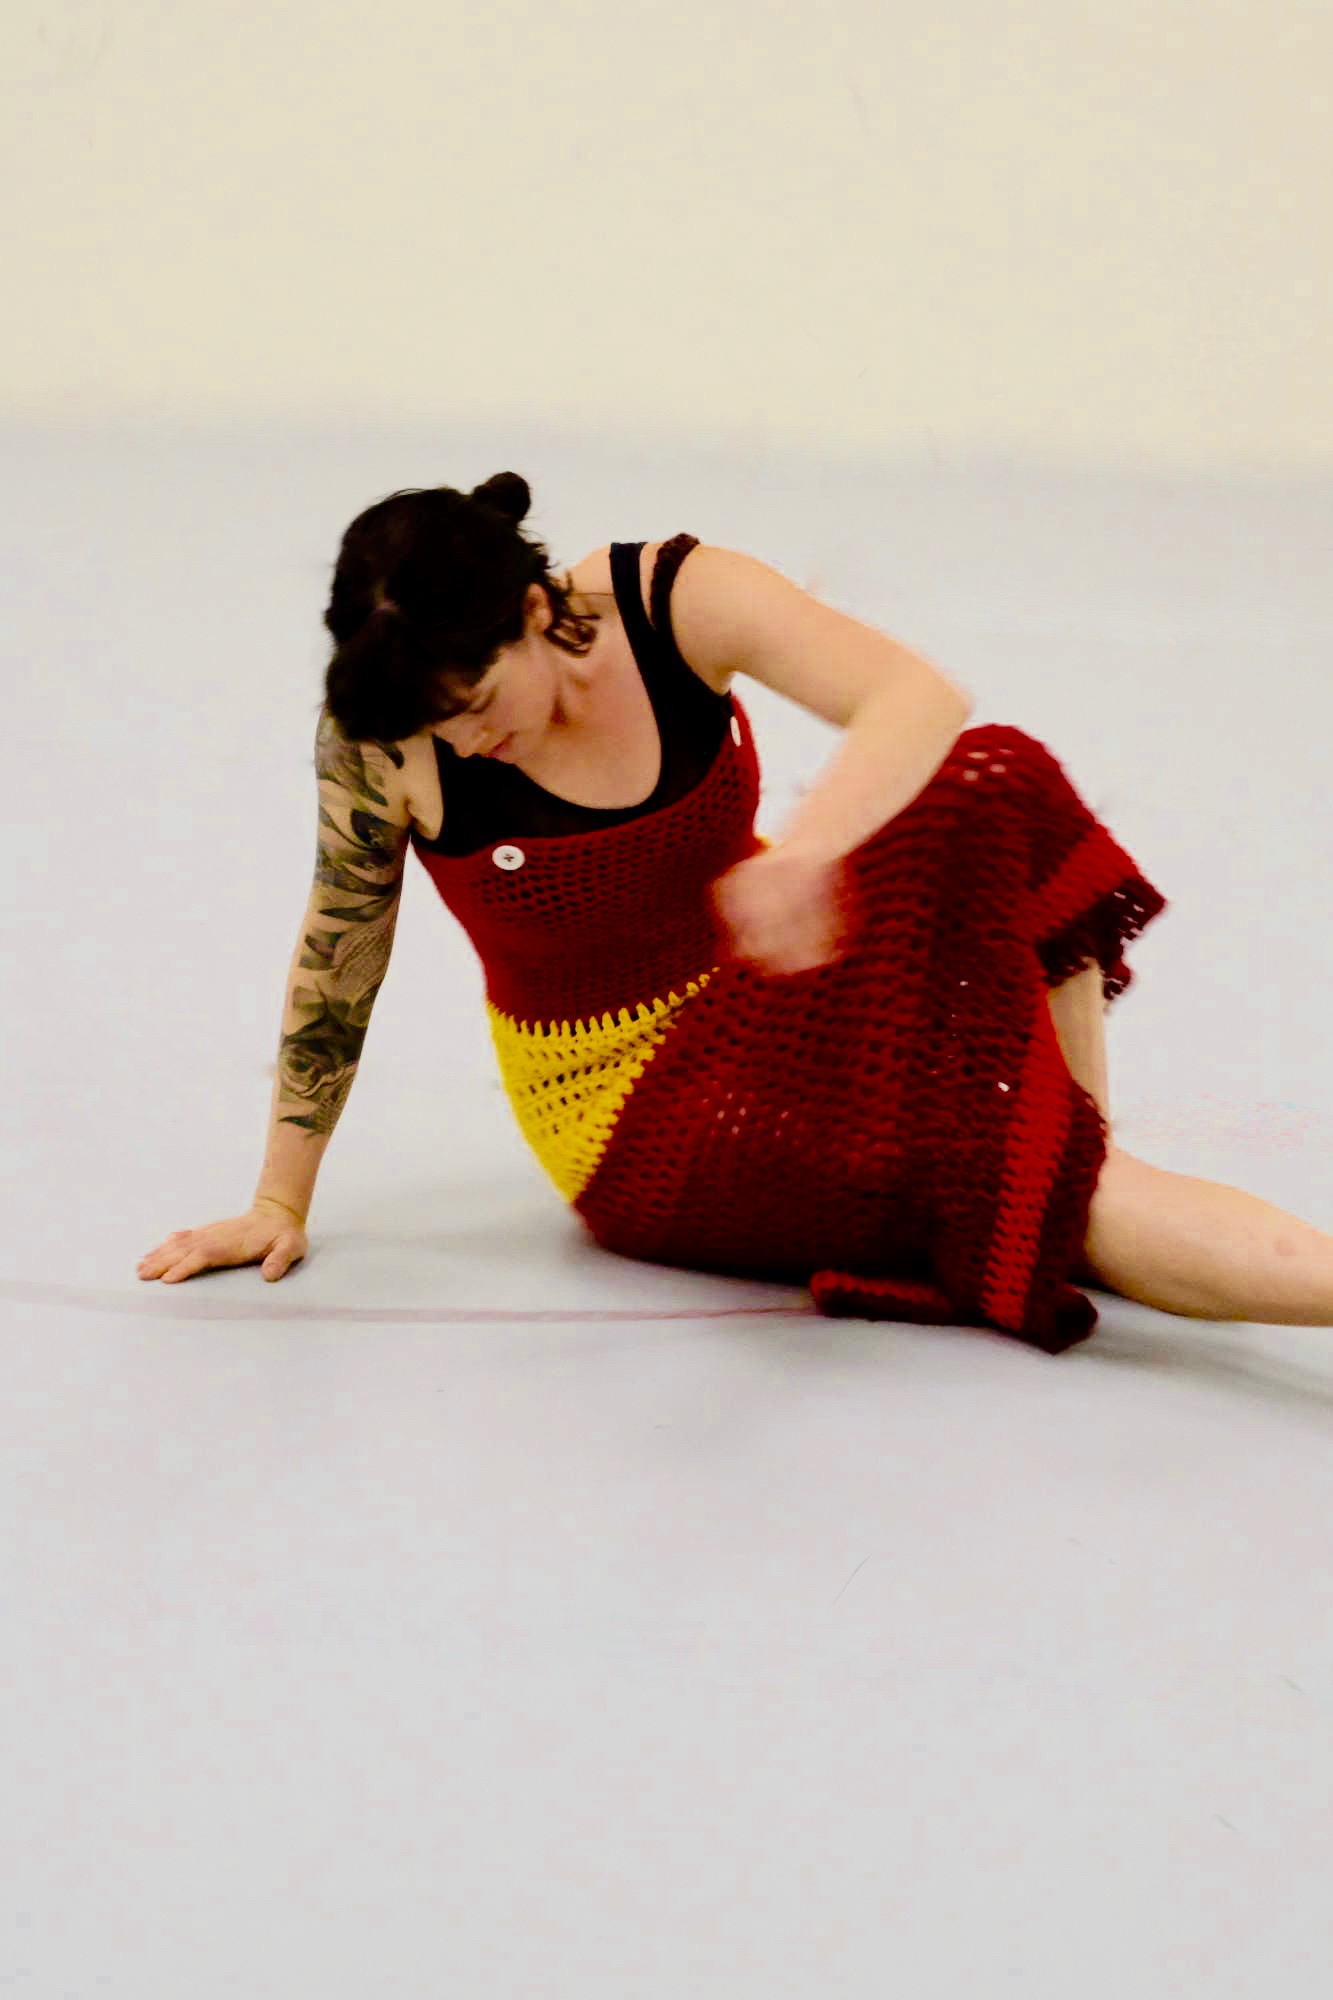 a dancer seated on the floor in a knitted dress leans on one arm and looks down